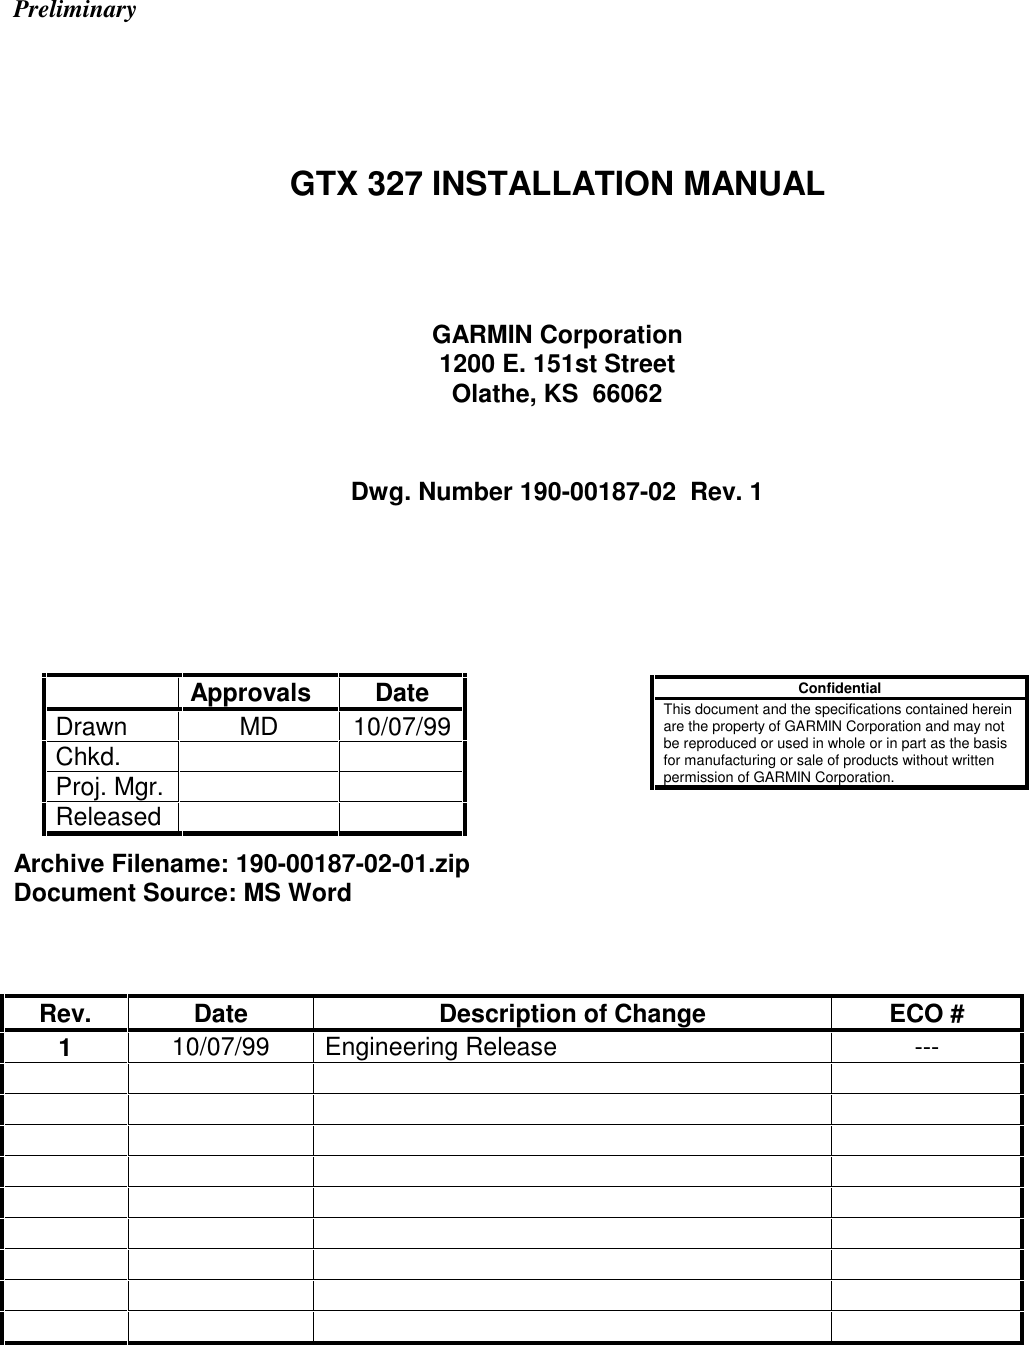 PreliminaryGTX 327 INSTALLATION MANUALGARMIN Corporation1200 E. 151st StreetOlathe, KS  66062Dwg. Number 190-00187-02  Rev. 1Archive Filename: 190-00187-02-01.zipDocument Source: MS WordRev. Date Description of Change ECO #1 10/07/99 Engineering Release ---ConfidentialThis document and the specifications contained hereinare the property of GARMIN Corporation and may notbe reproduced or used in whole or in part as the basisfor manufacturing or sale of products without writtenpermission of GARMIN Corporation.Approvals DateDrawn MD 10/07/99Chkd.Proj. Mgr.Released